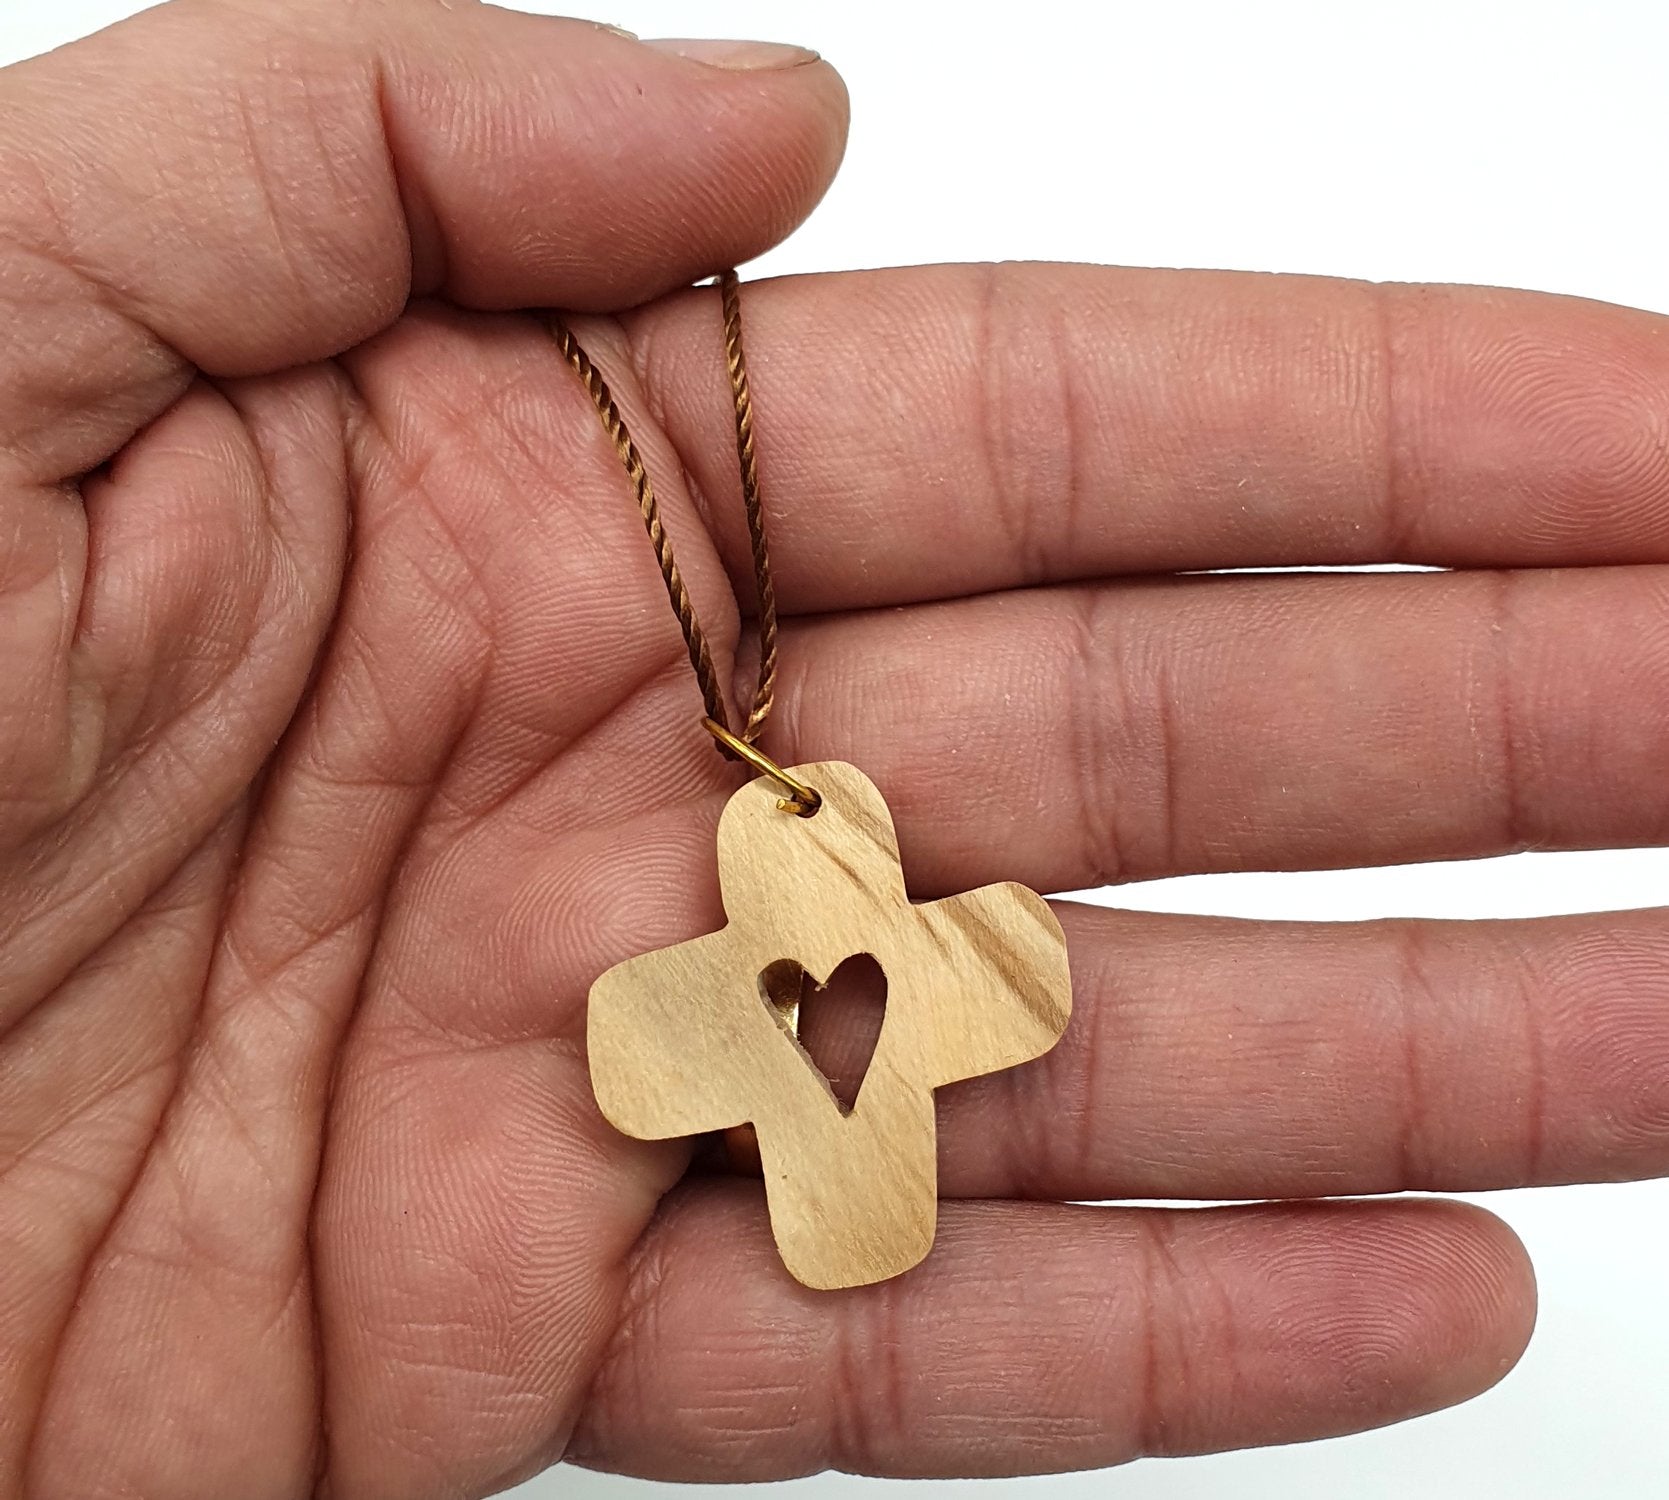 Handmade Olive Wood Heart Cross Necklace from the Holy Land - Spiritual Elegance for Men, Women, Boys & Girls - 1.5 Inches - Zuluf